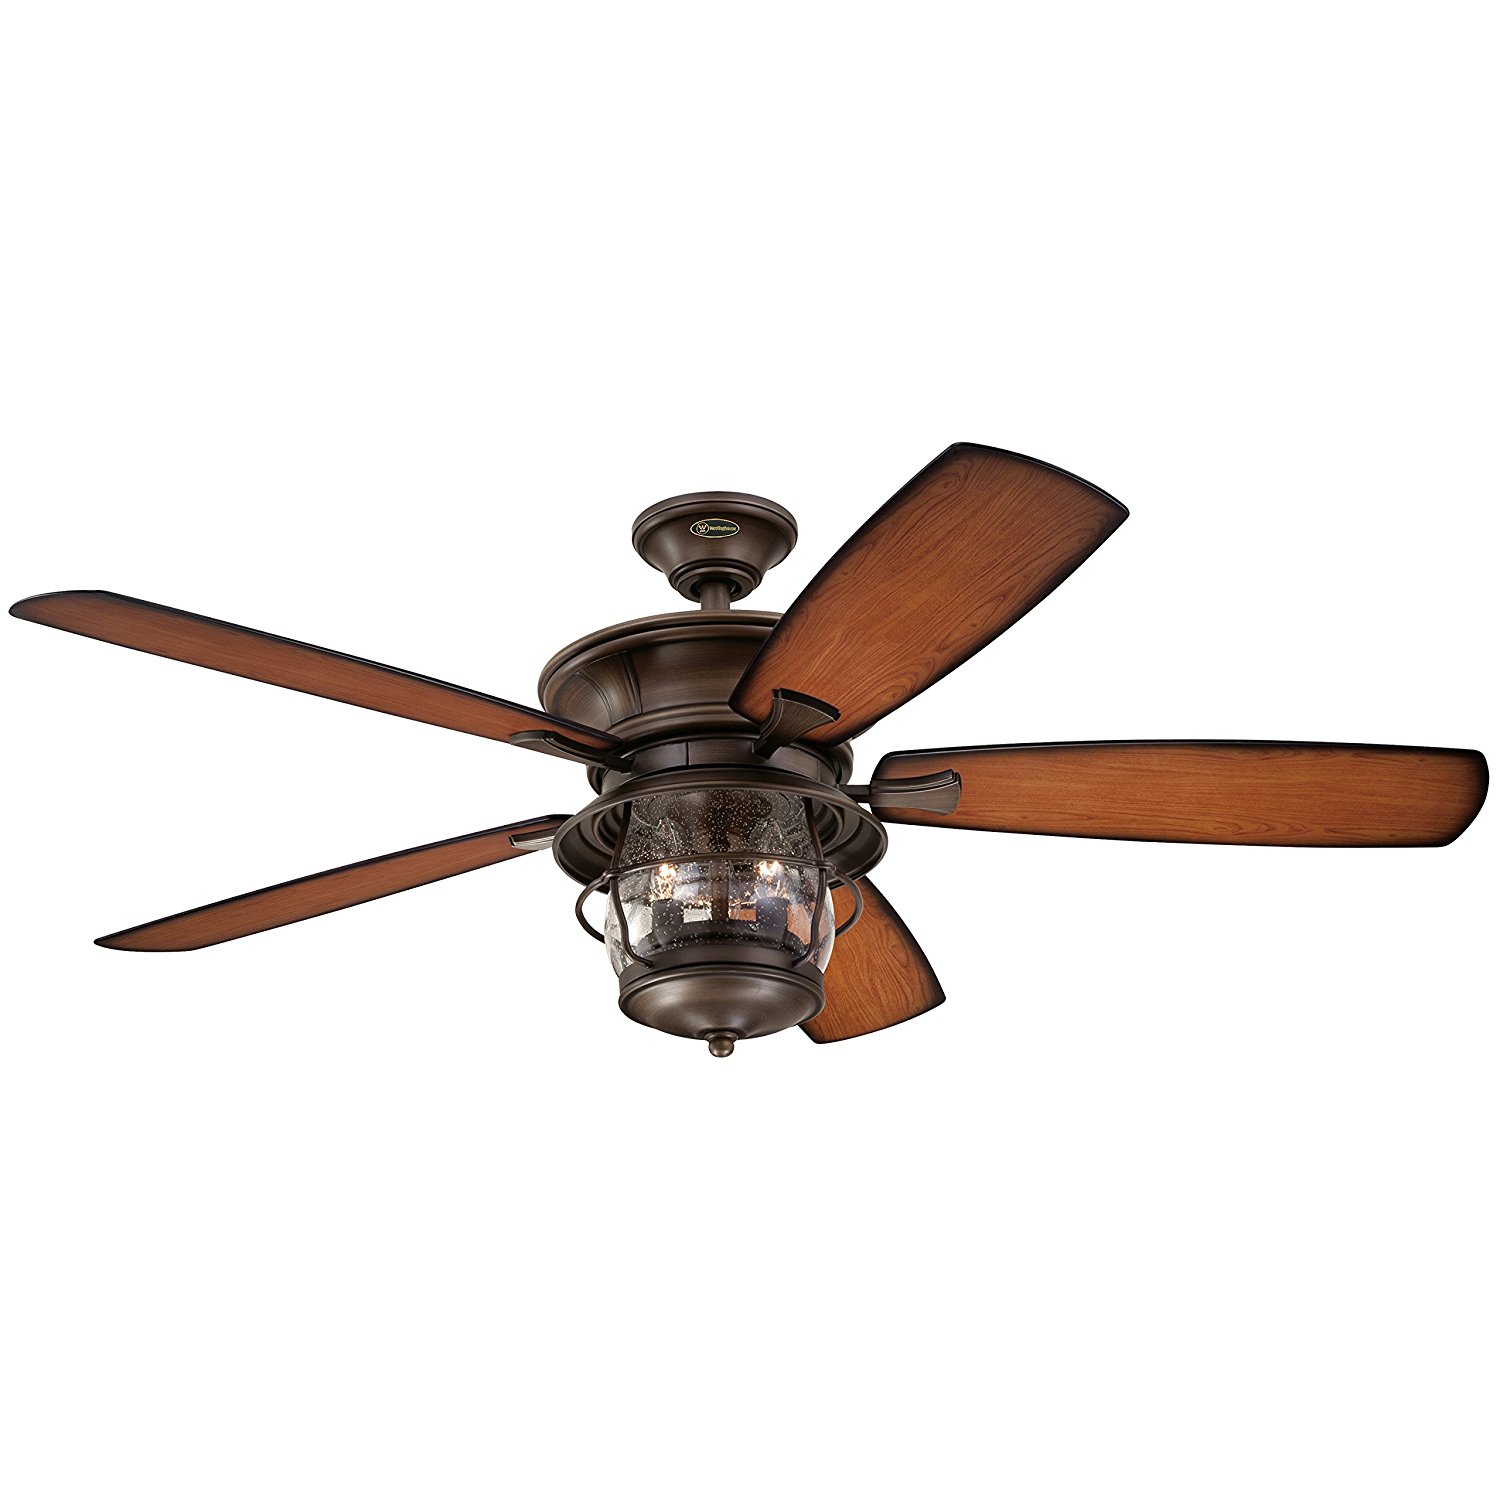 7800000 Brentford 52-Inch Aged Walnut Indoor/Outdoor Ceiling Fan, Light Kit with Clear Seeded Glass